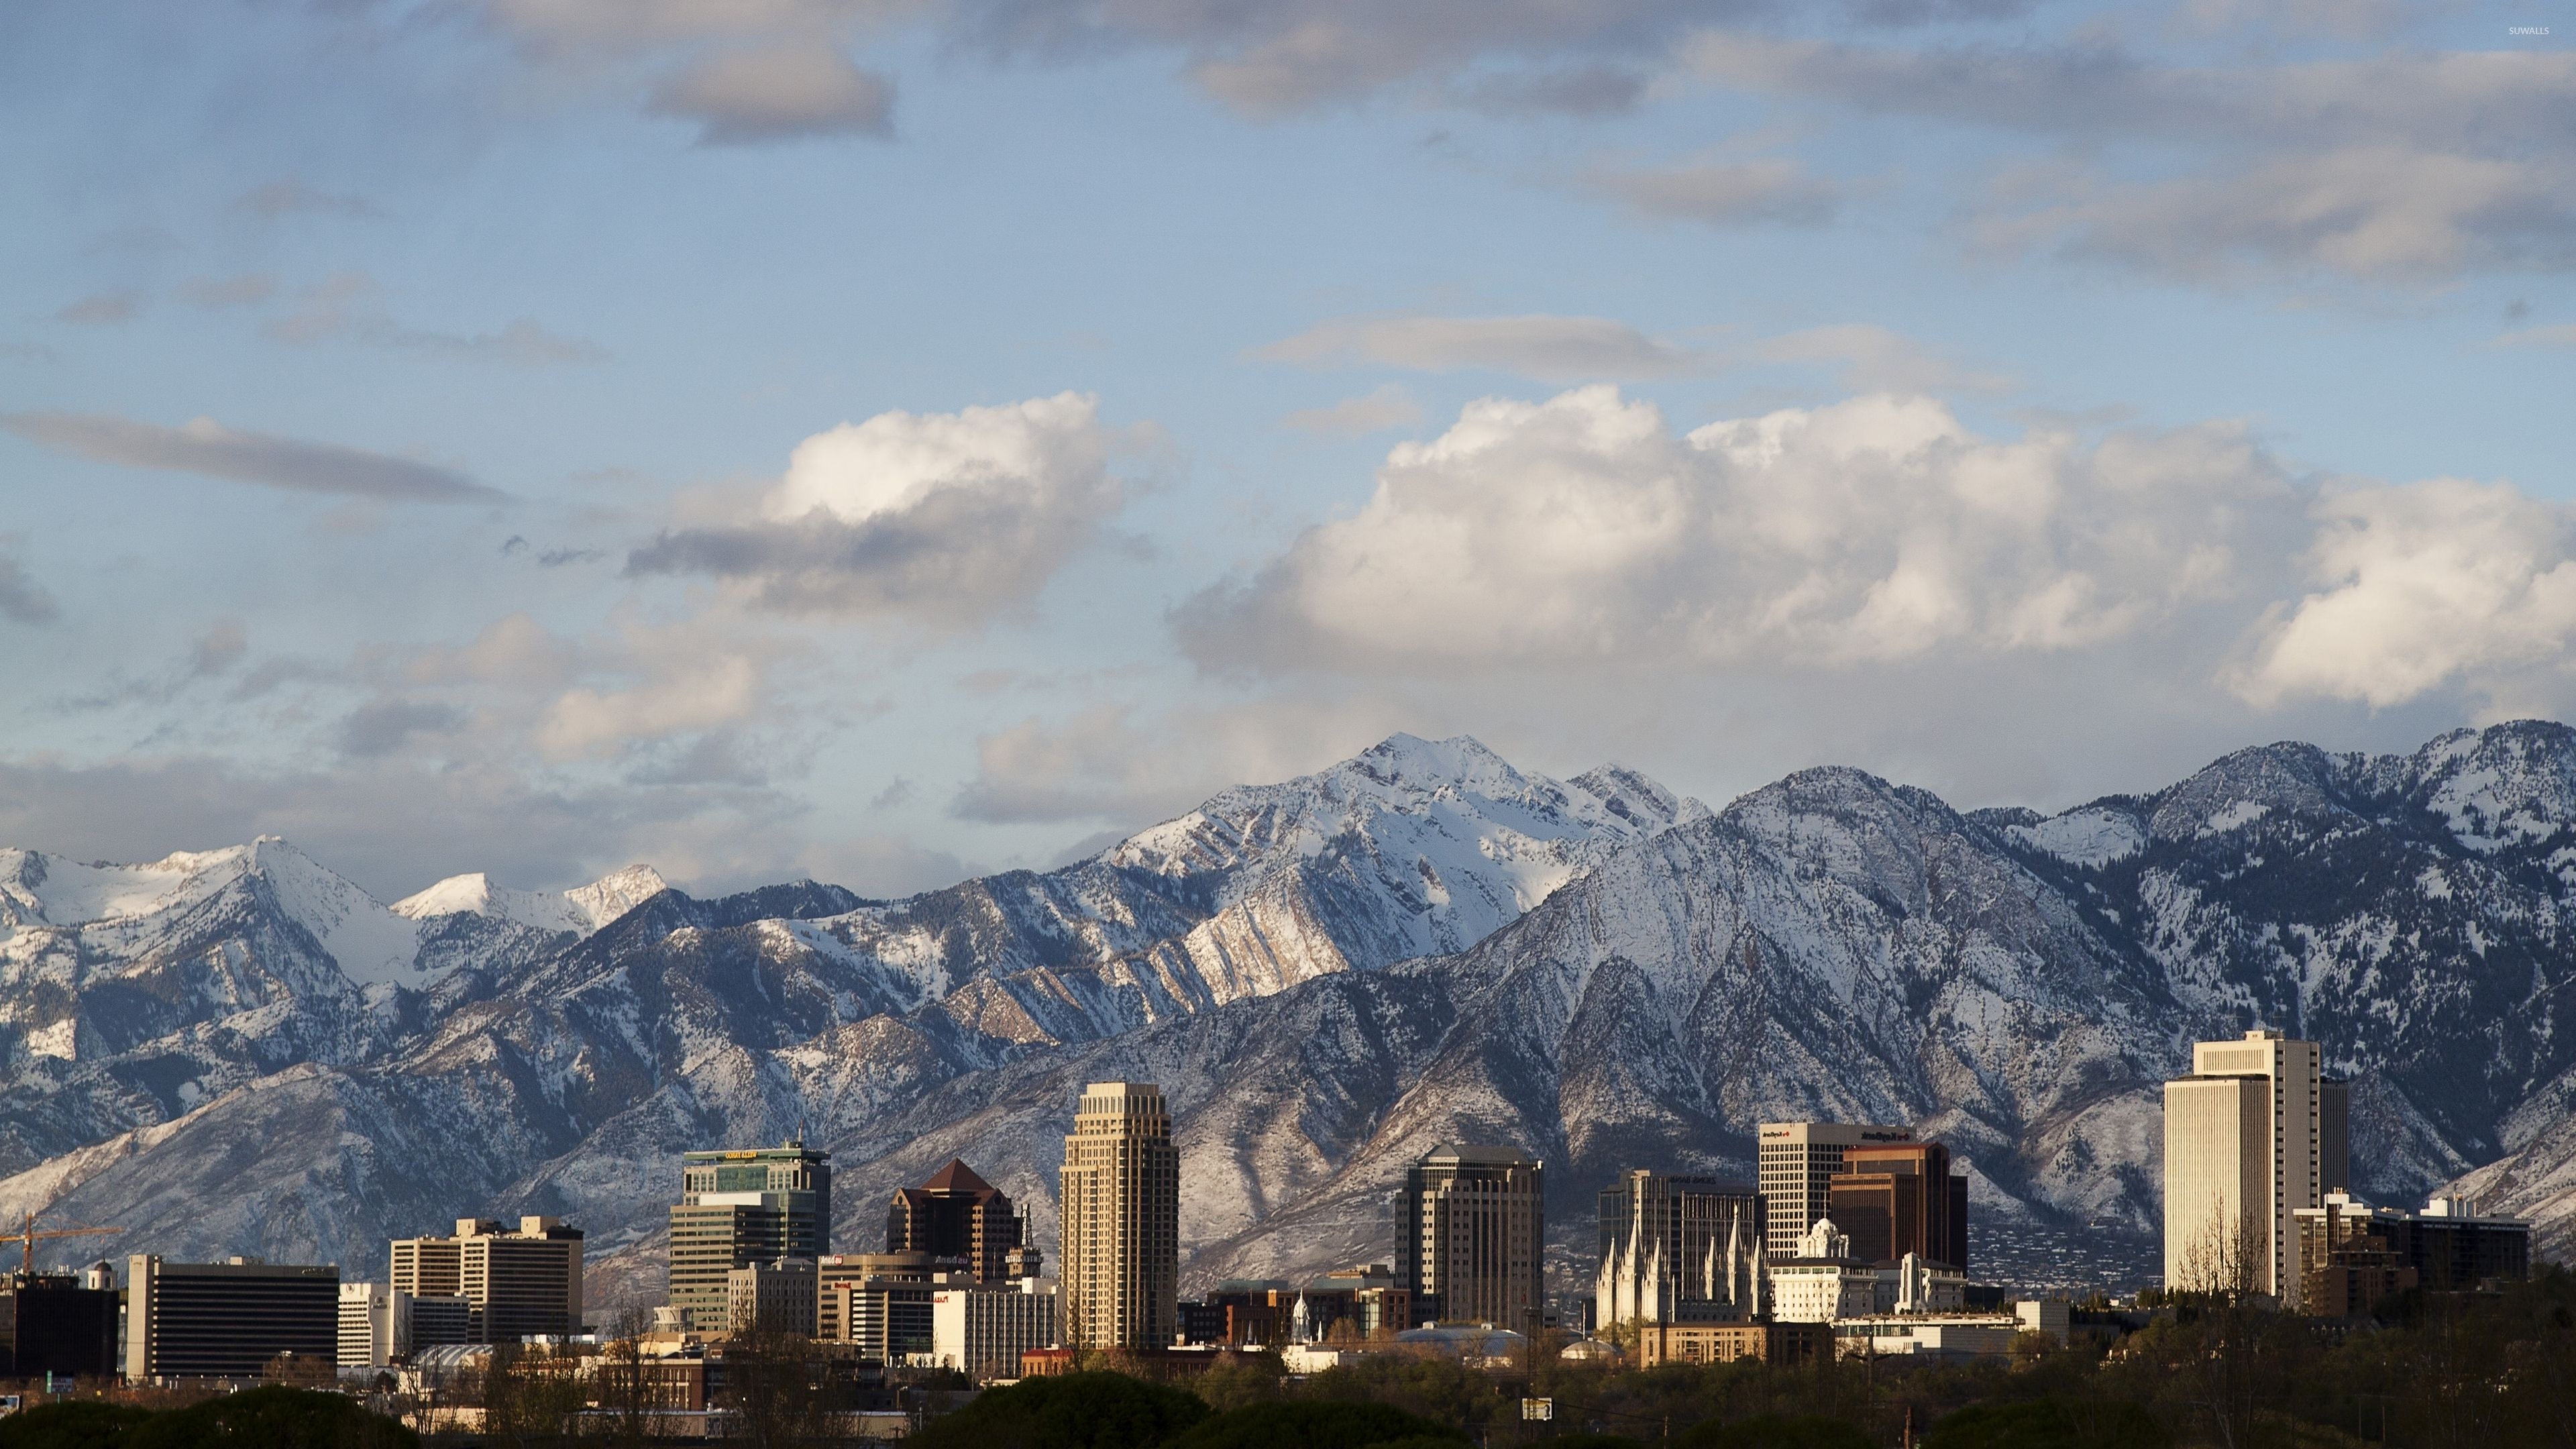 Utah: Salt Lake City is the capital and most populous city. 3840x2160 4K Background.